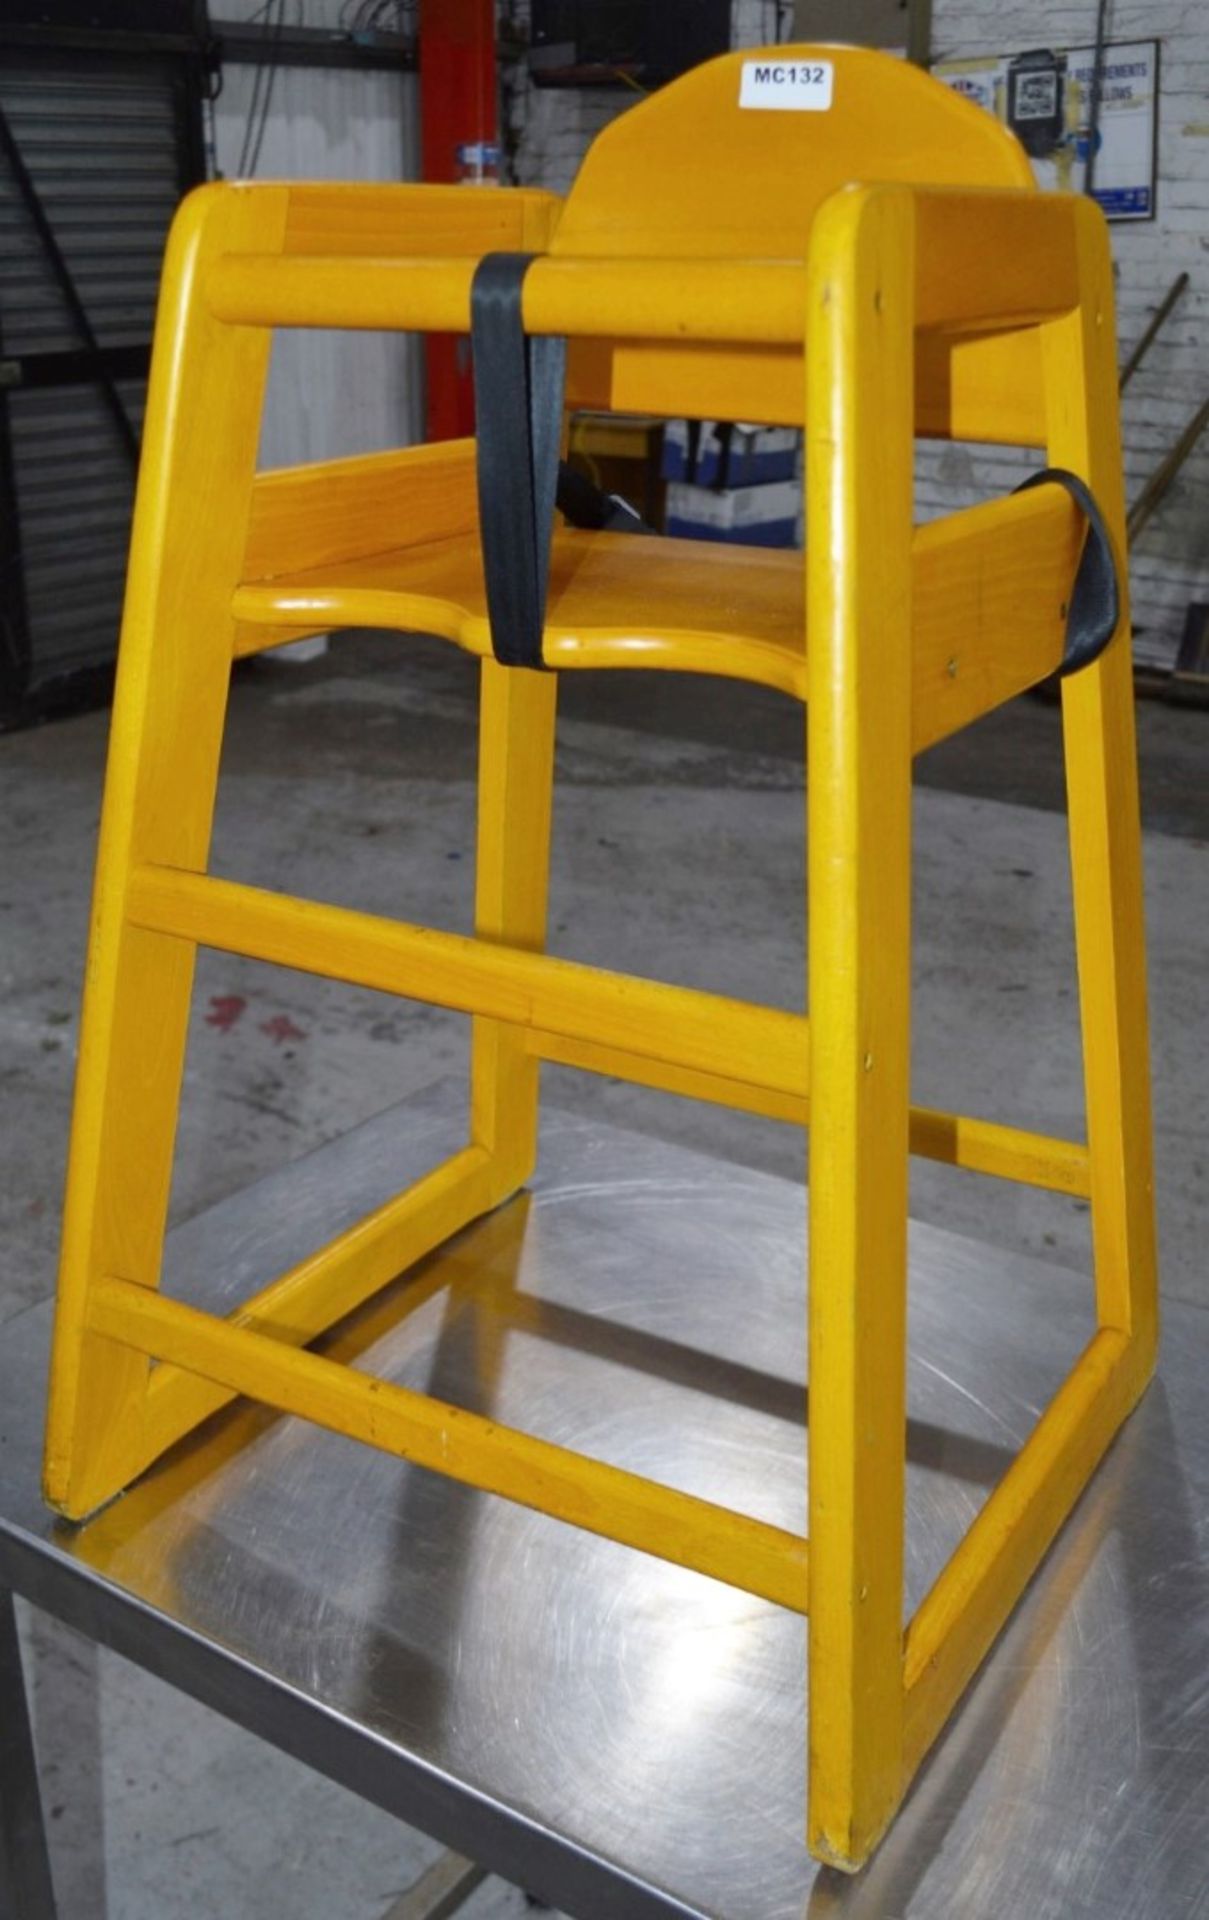 4 x FAMEG Baby High Chairs In Yellow - Dimensions: Width 48 x Depth 48 x Back Height 75cm, Seat 50cm - Image 4 of 8